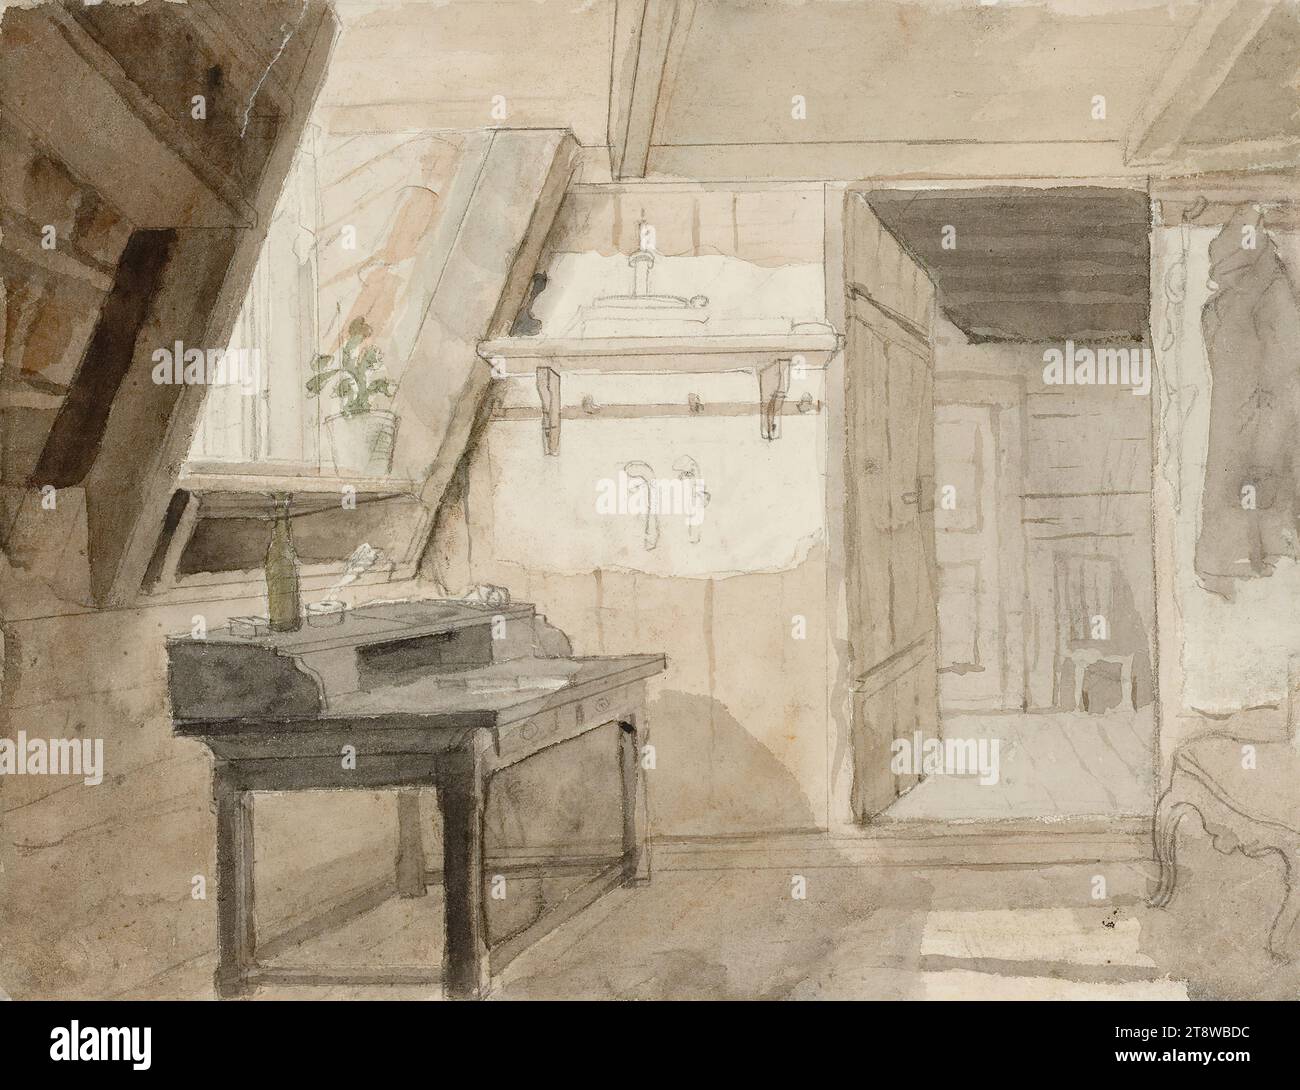 Robert Wilhelm Ekman, 13.8.1808, Uusikaupunki, 19.2.1873, Turku, Interior. Writing table and armchair, with an open door leading to another room in the background, 1840 - 1873, 18 × 5 × 24 cm, watercolour Stock Photo